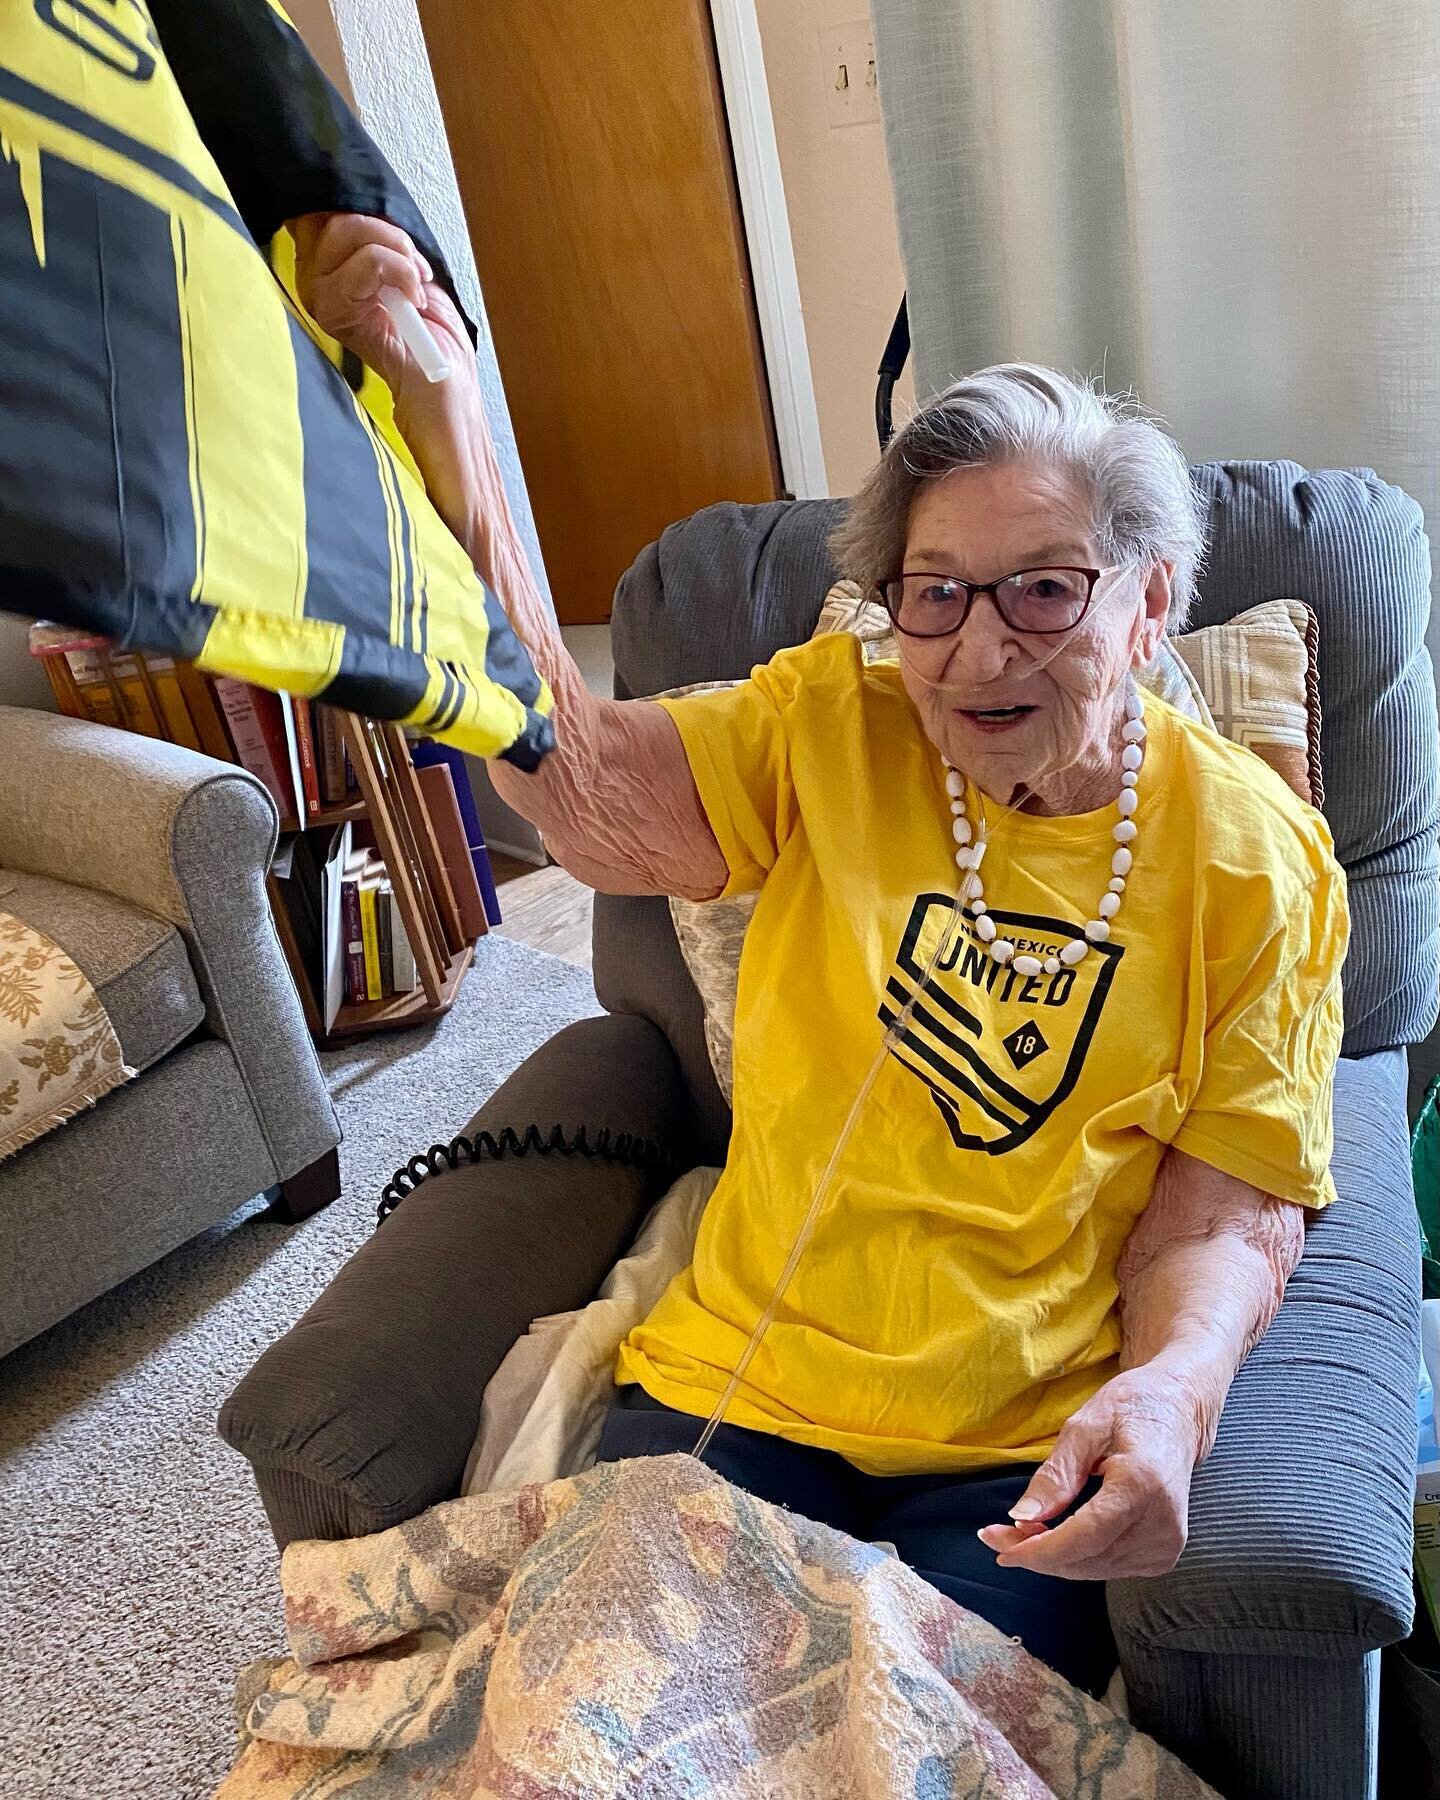 Grandma is @yungjoc650 if he played for @newmexicoutd ⚽️⚾️ for Halloween 
fun fact..: we saw him play at the isotopes when he was with the dodgers. PLUS he has a brother with Down syndrome so we&rsquo;ve always been big fans of his